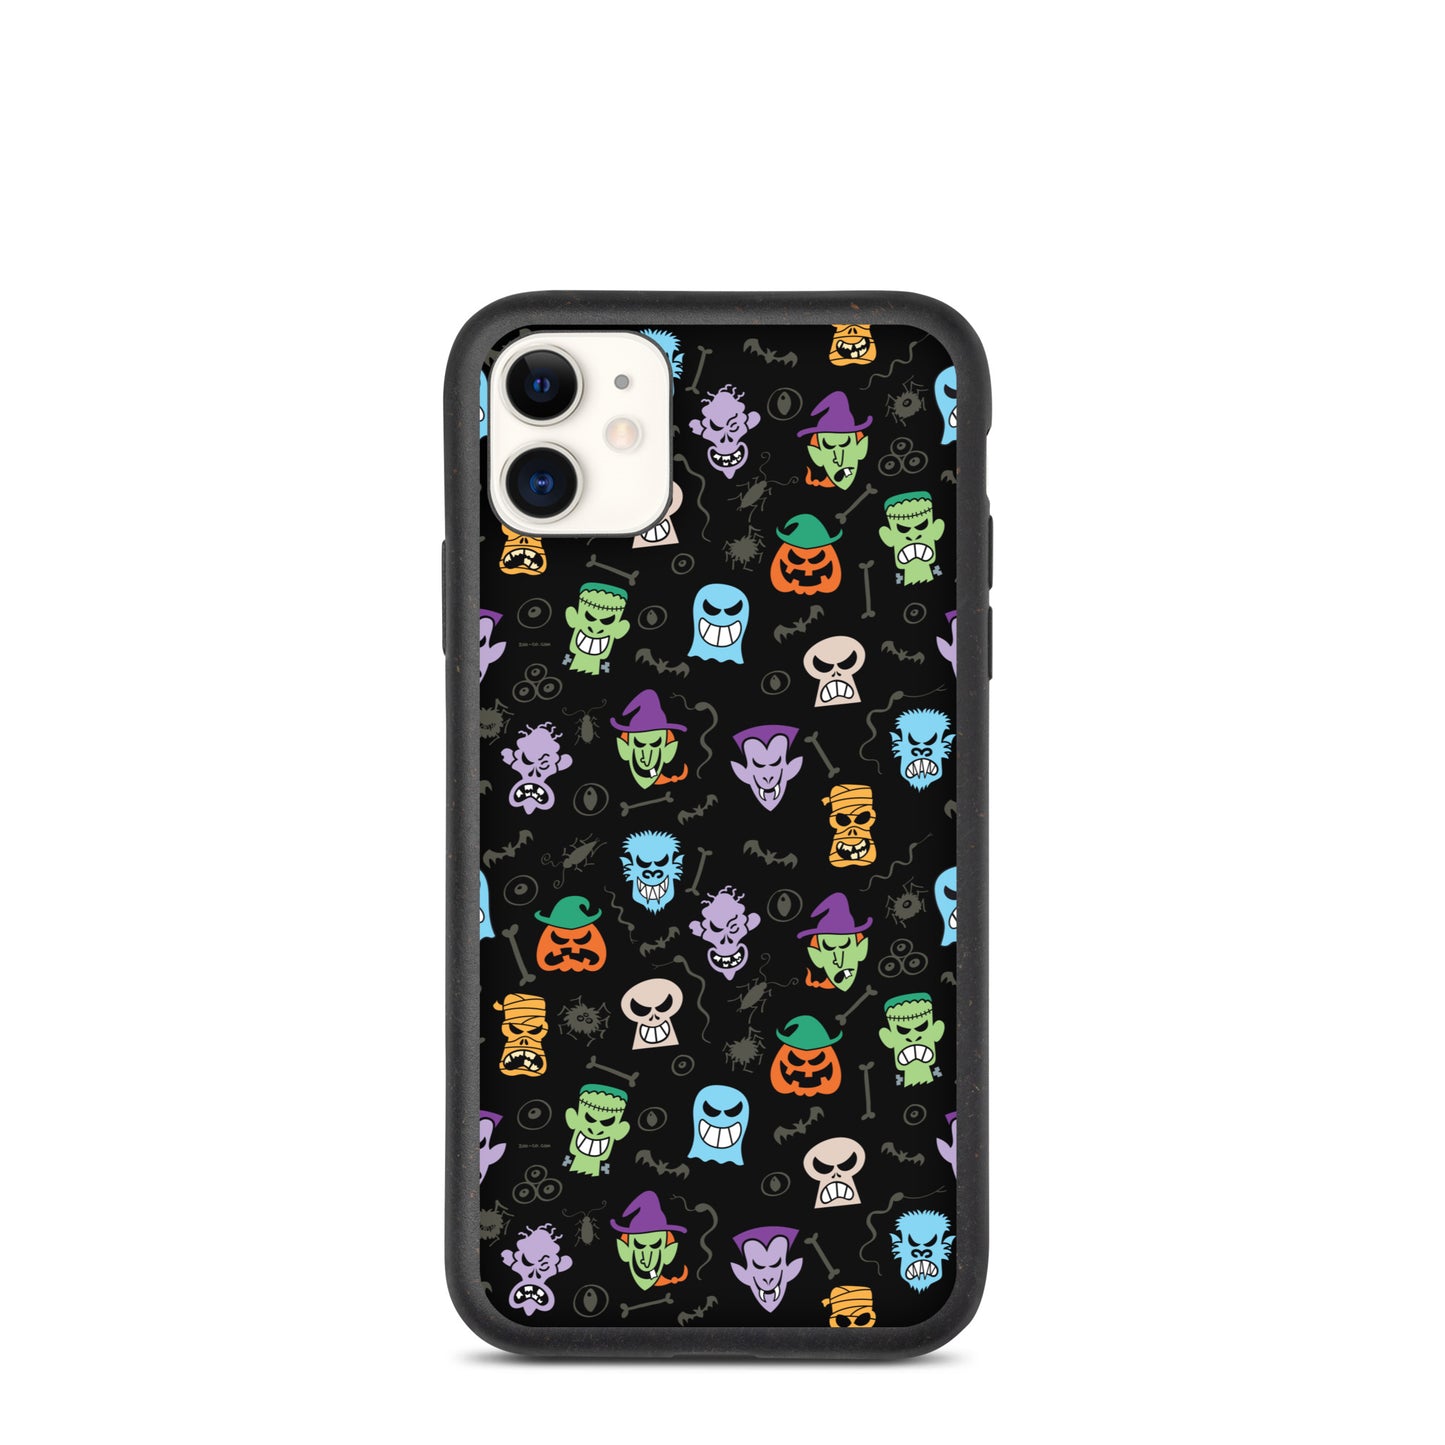 Scary Halloween faces Speckled iPhone case. iPhone 11